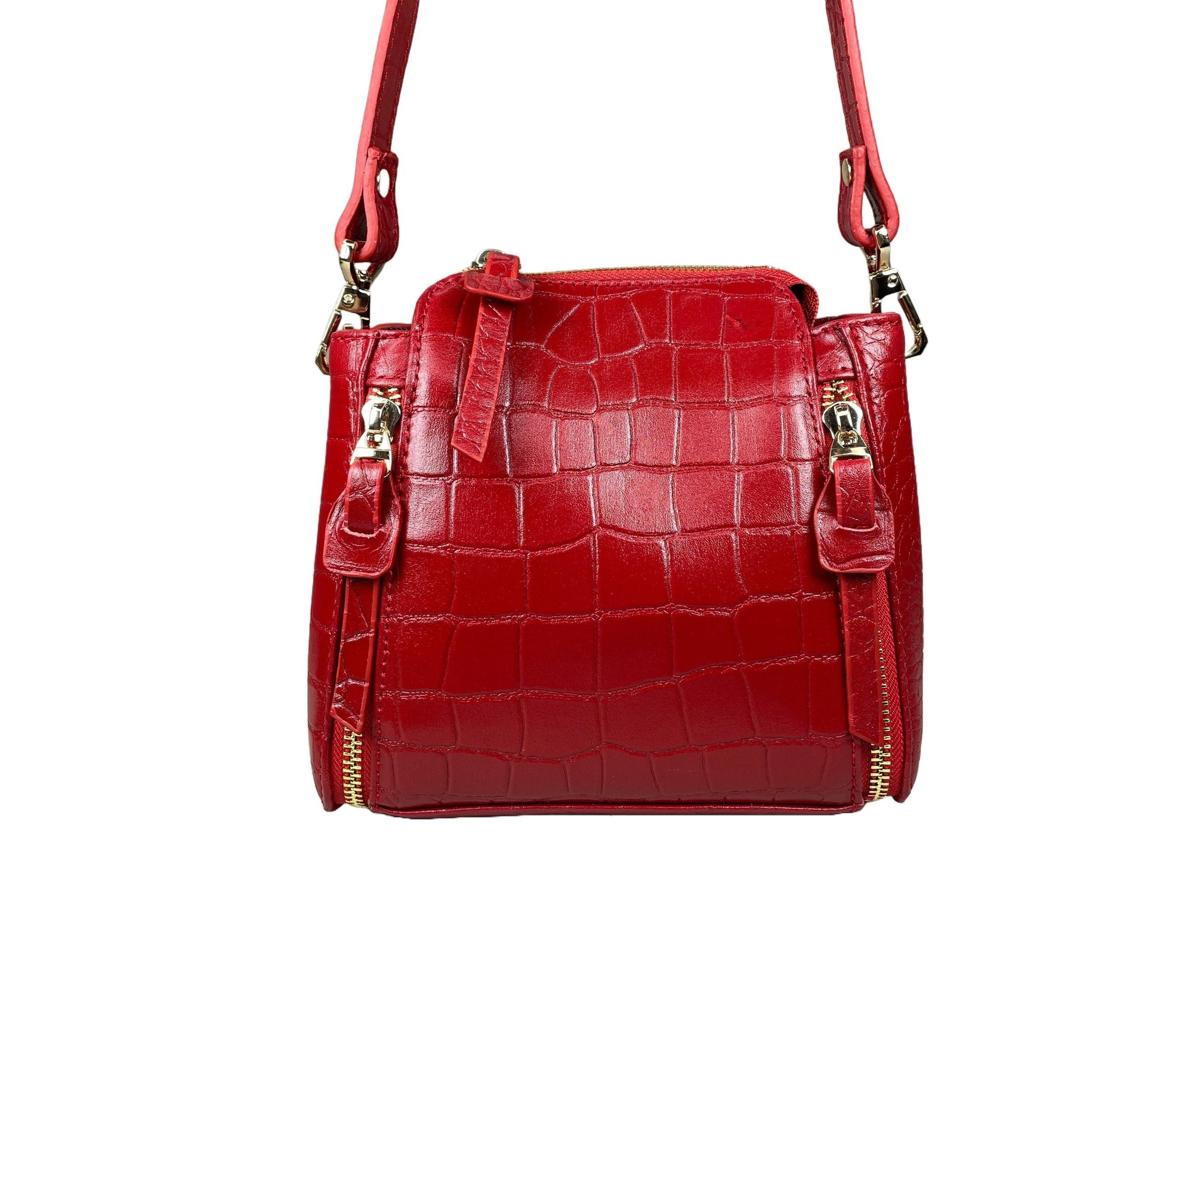 LeatherLuxe - Red Leather Handbag Shoulder Bag for Women; Crocodile Style Genuine leather Designer Premium leather bag for women leather hobo tote messenger bag Leather Accessories Leather Shop Leather Goods